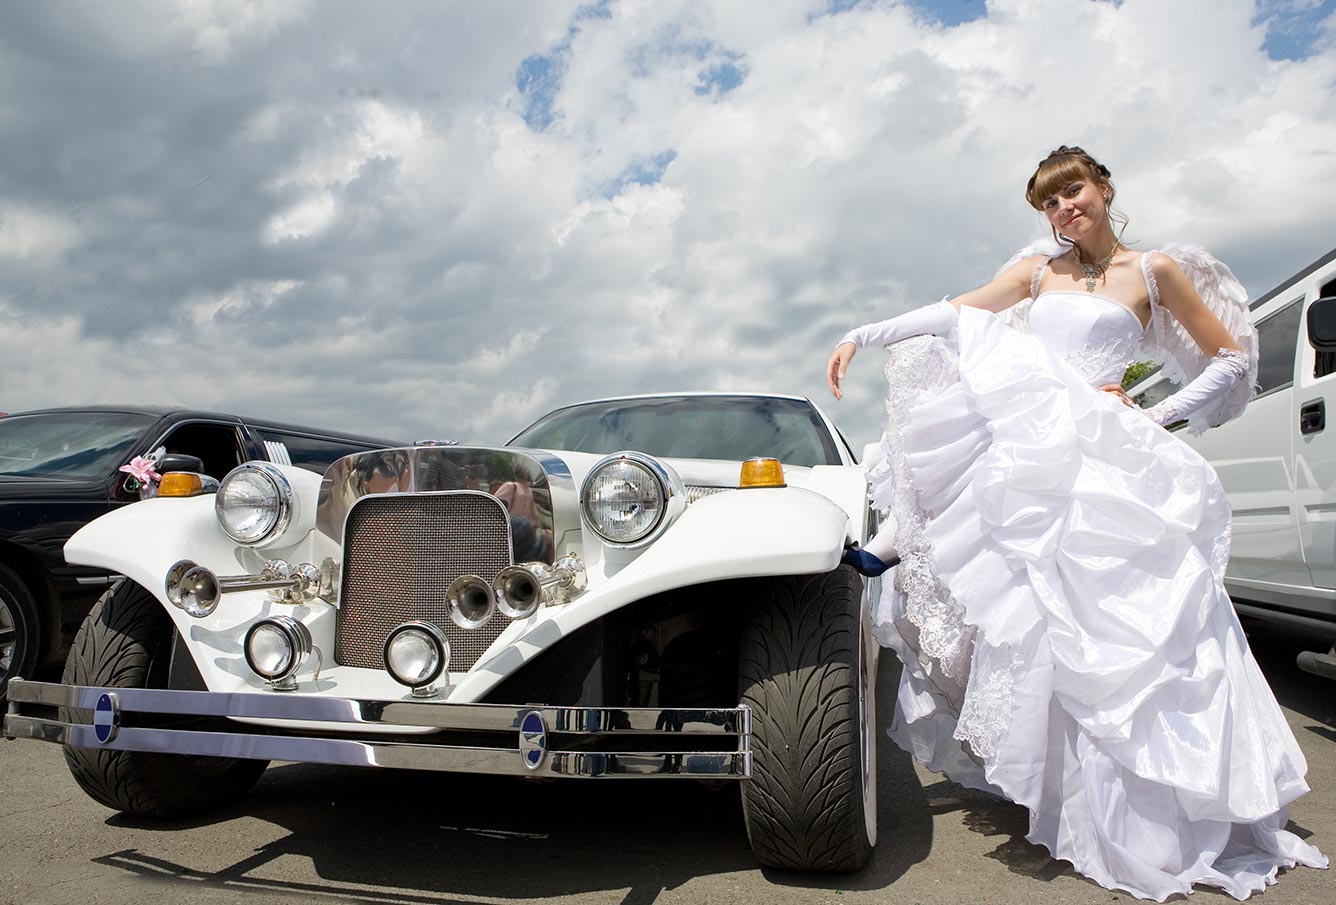 Choosing a Vintage Limousine for Your Wedding